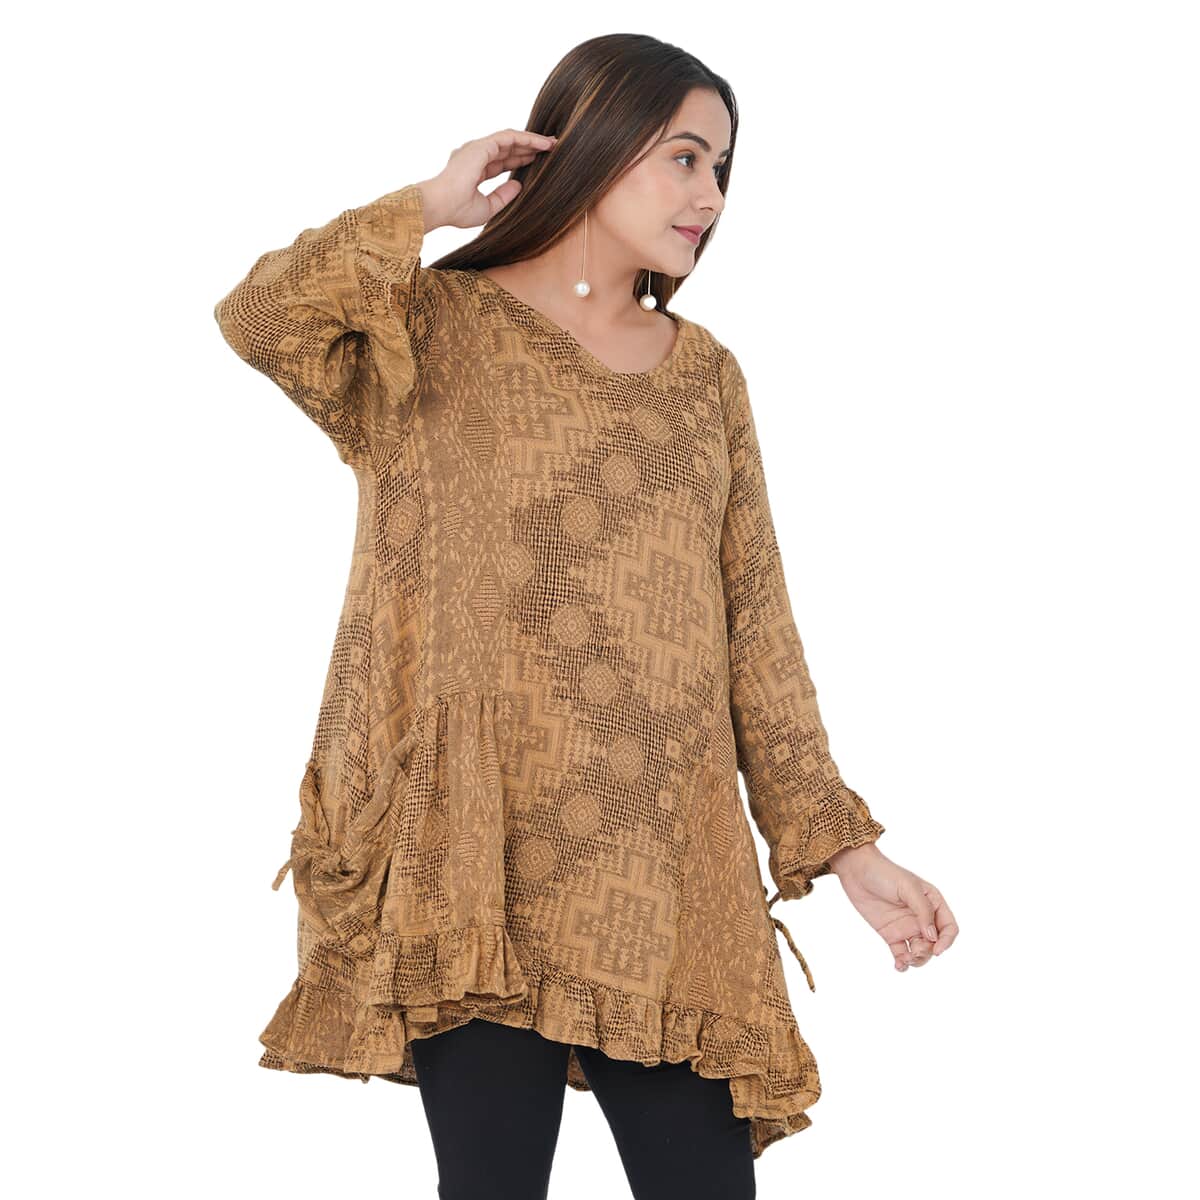 TAMSY Gold 100% Cotton Double Layer Jacquard Ruffle Hem Top - S/M (33"x24") image number 3